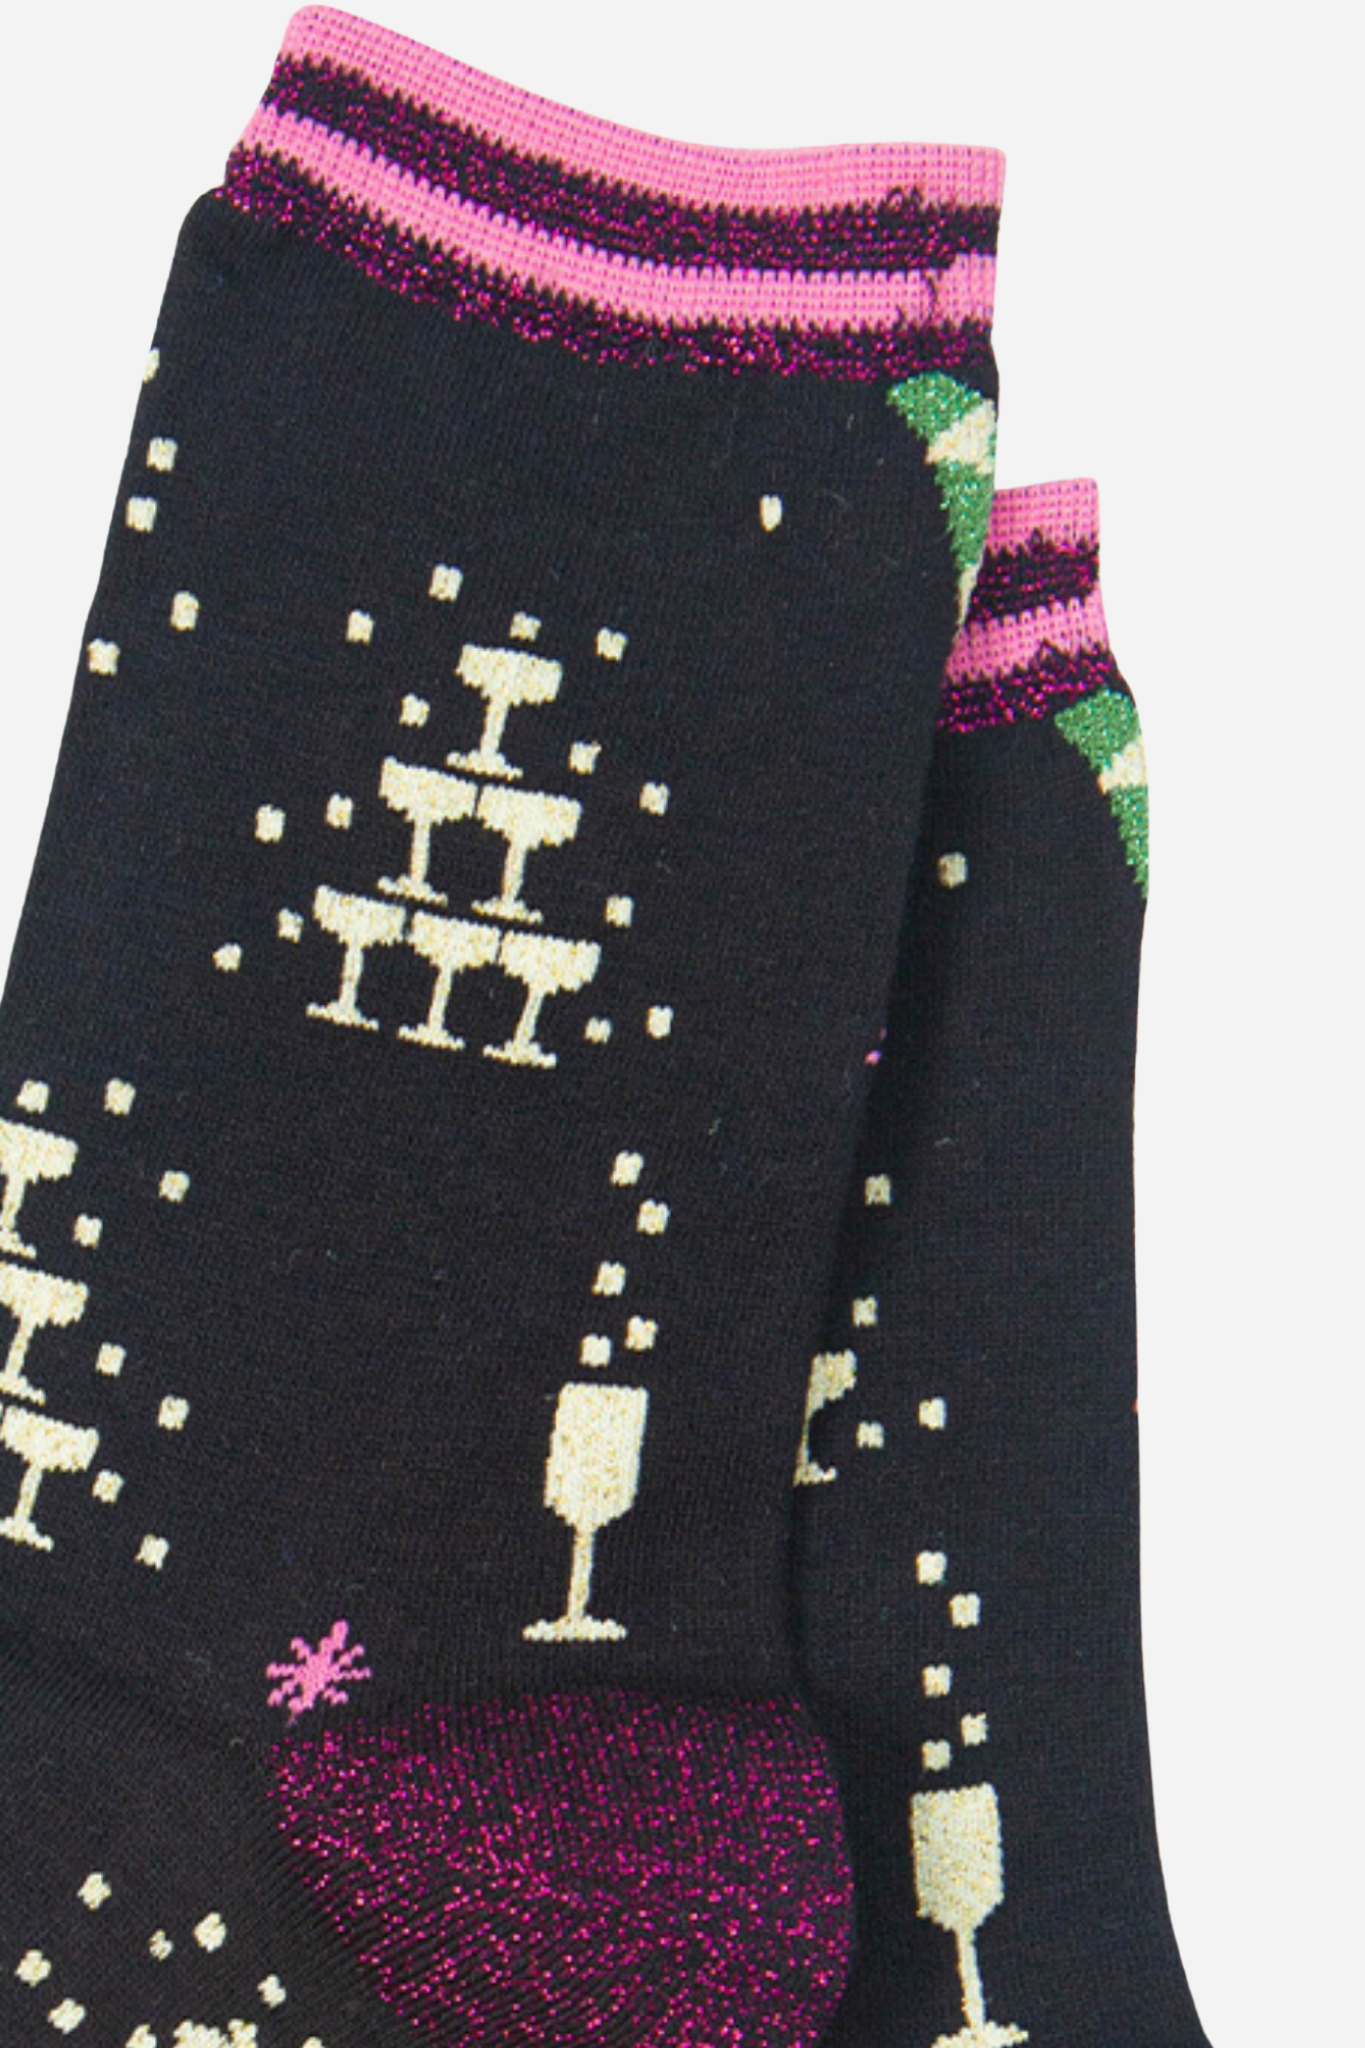 close up of the champagne celebration glitter pattern on the black bamboo socks